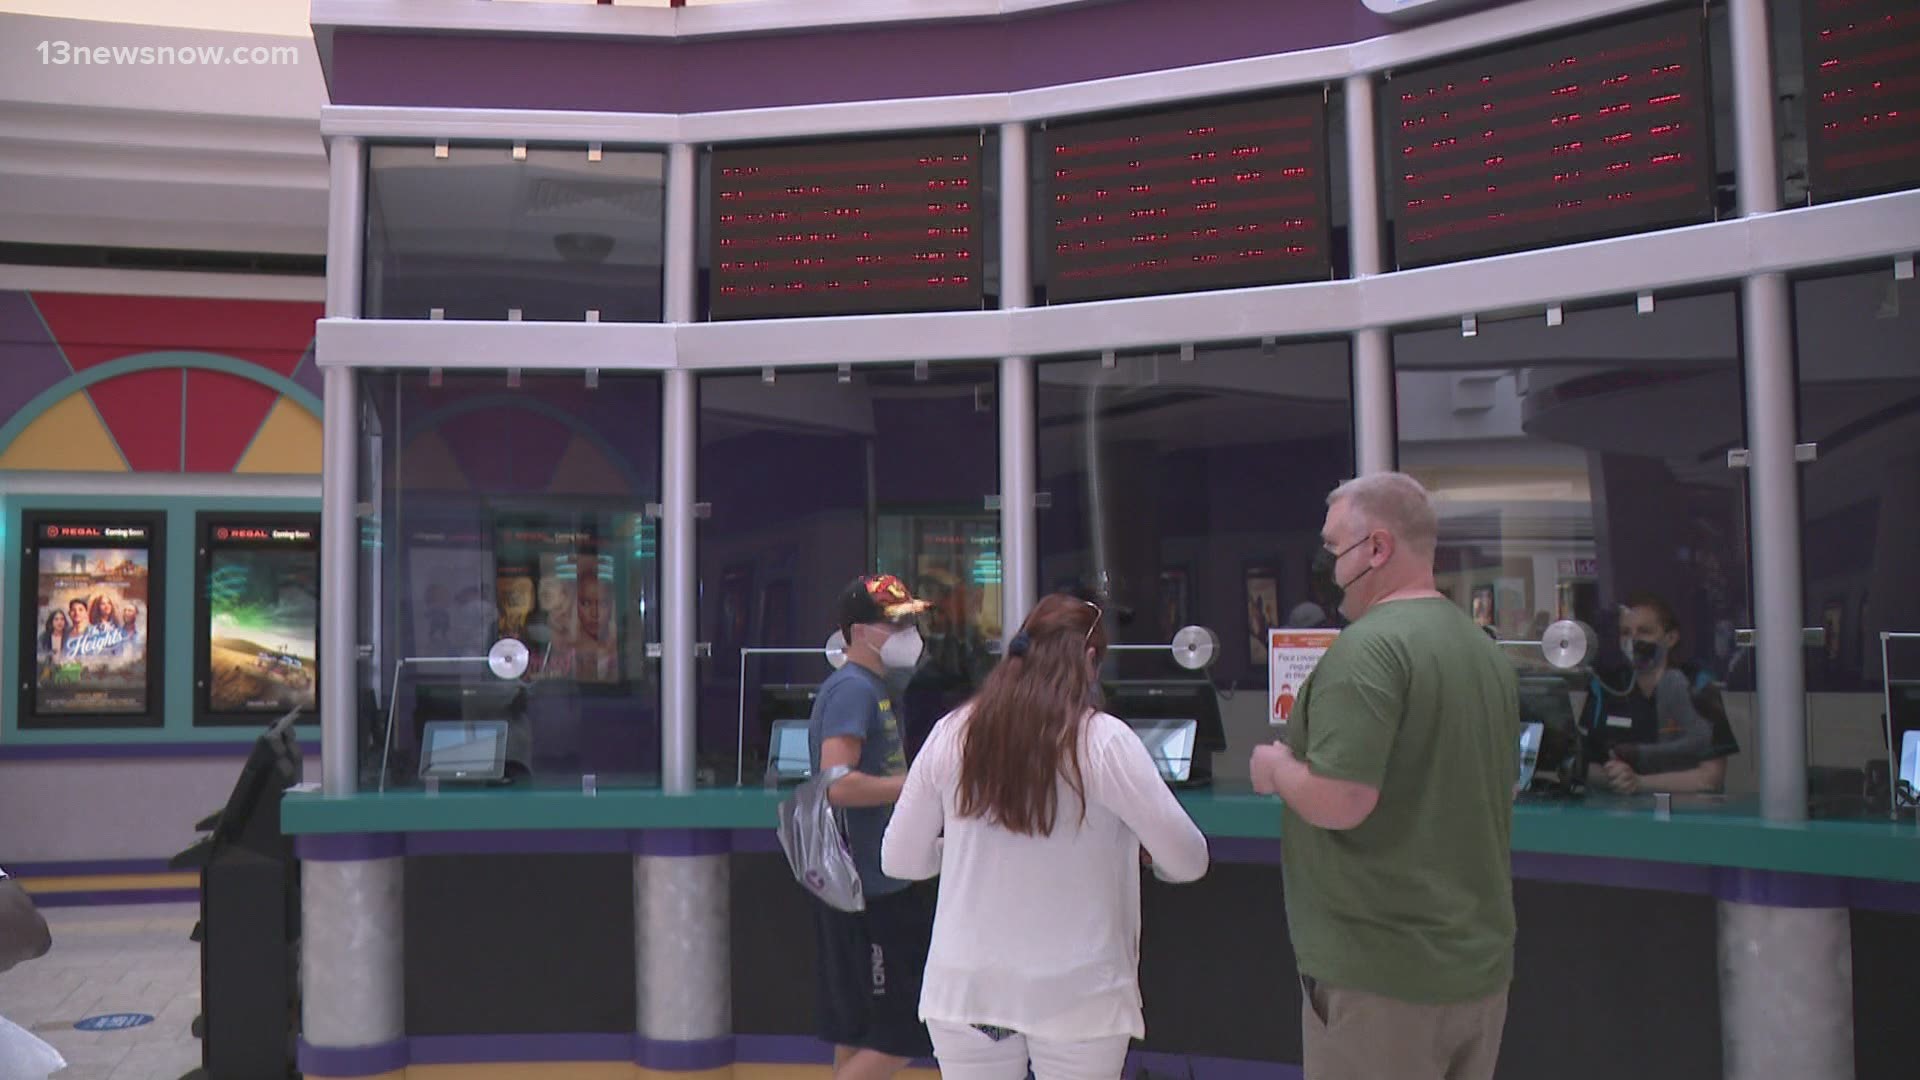 Local Regal Cinemas welcomed back customers for the first time in many months.